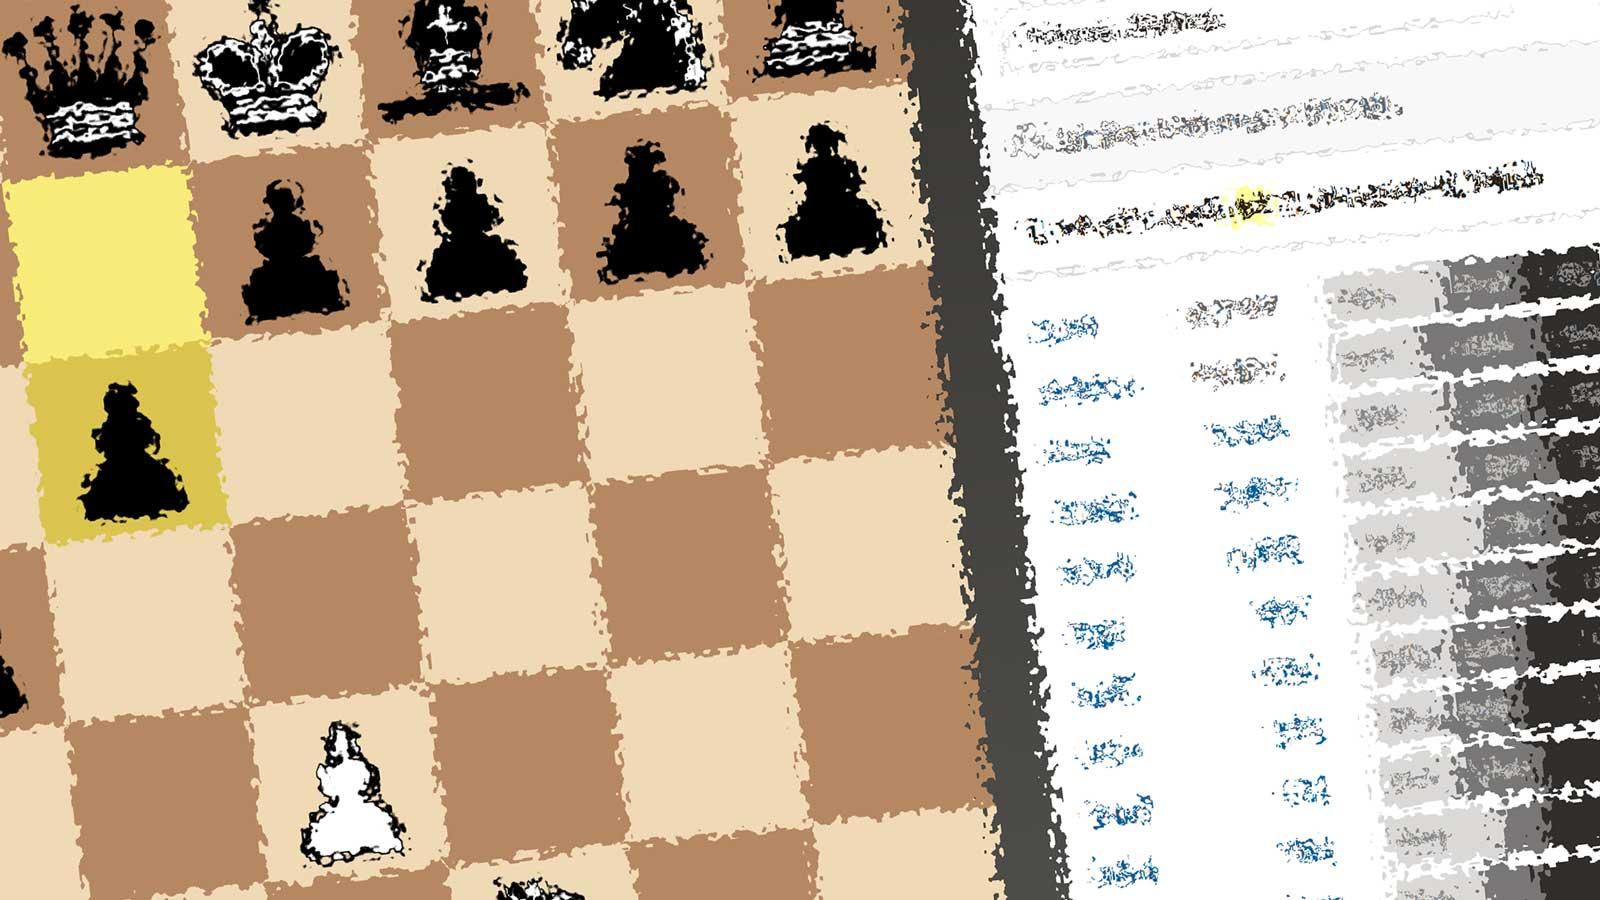 Chess.com Support on X: Studying your games in the Explorer is HUGE in  identifying opening lines you can improve. You will see common trends in  your games, and with a little analysis